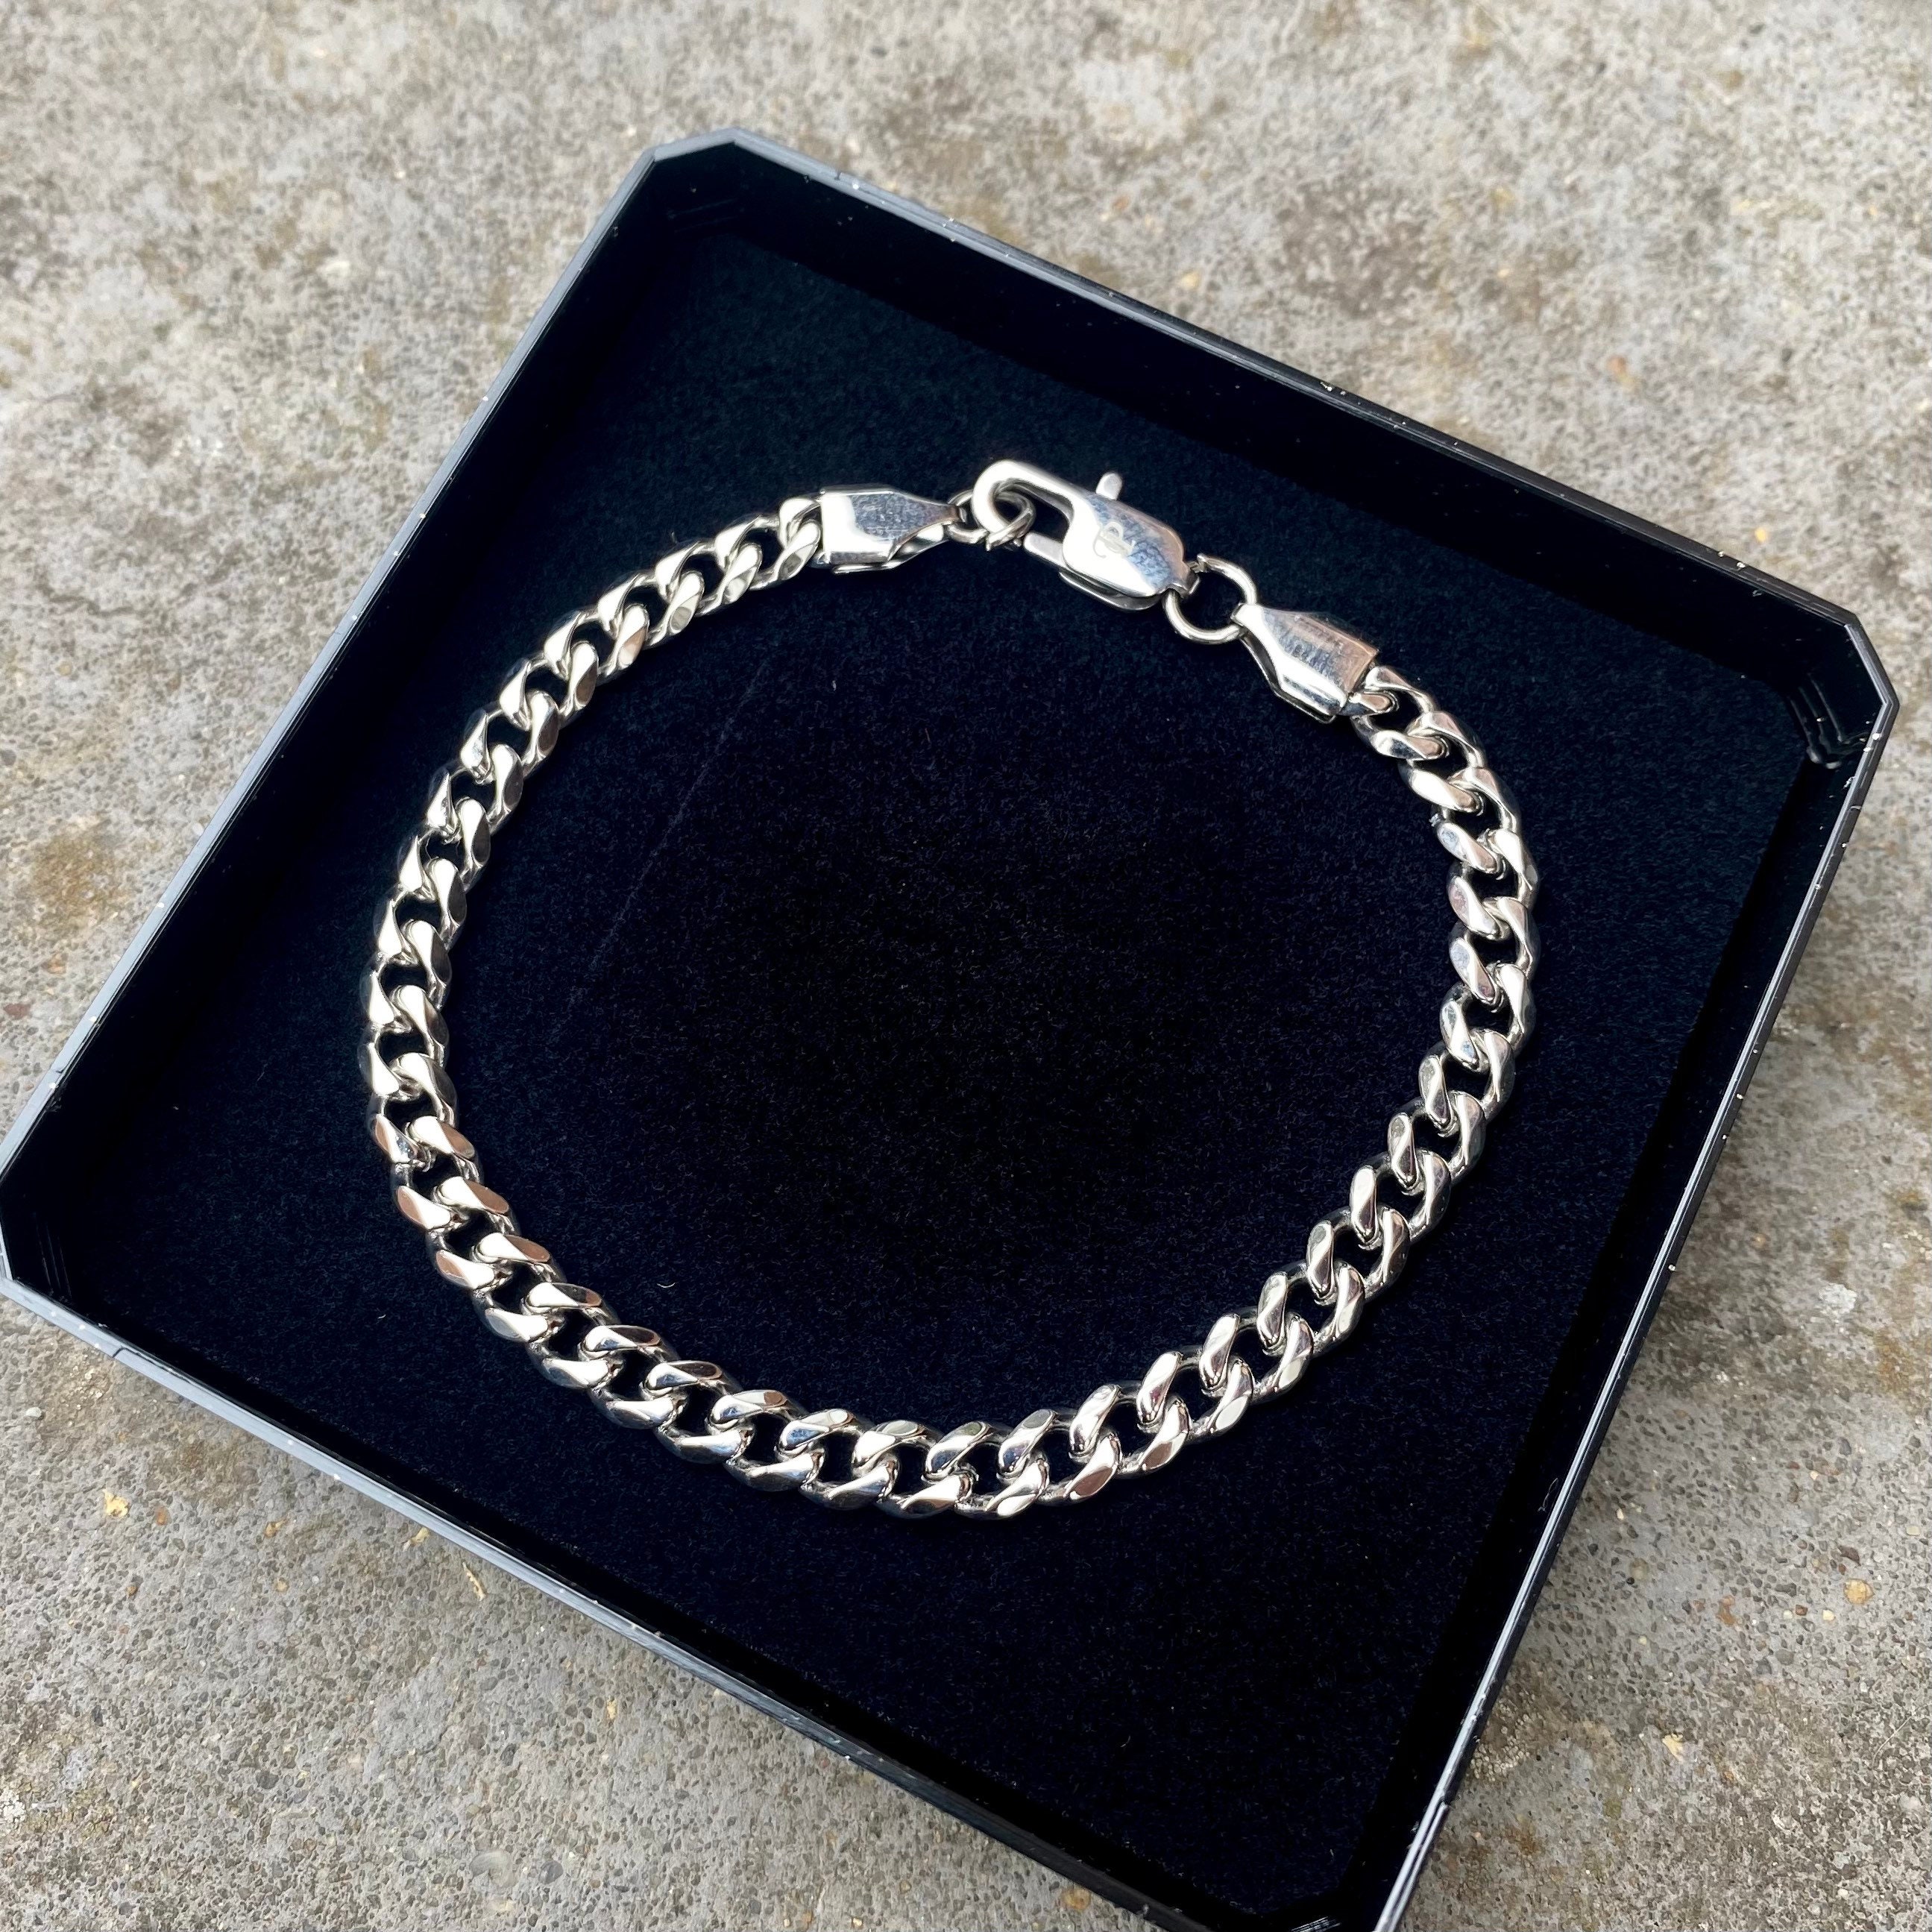 UNISEX very wide, hand chain, made of gold stainless steel